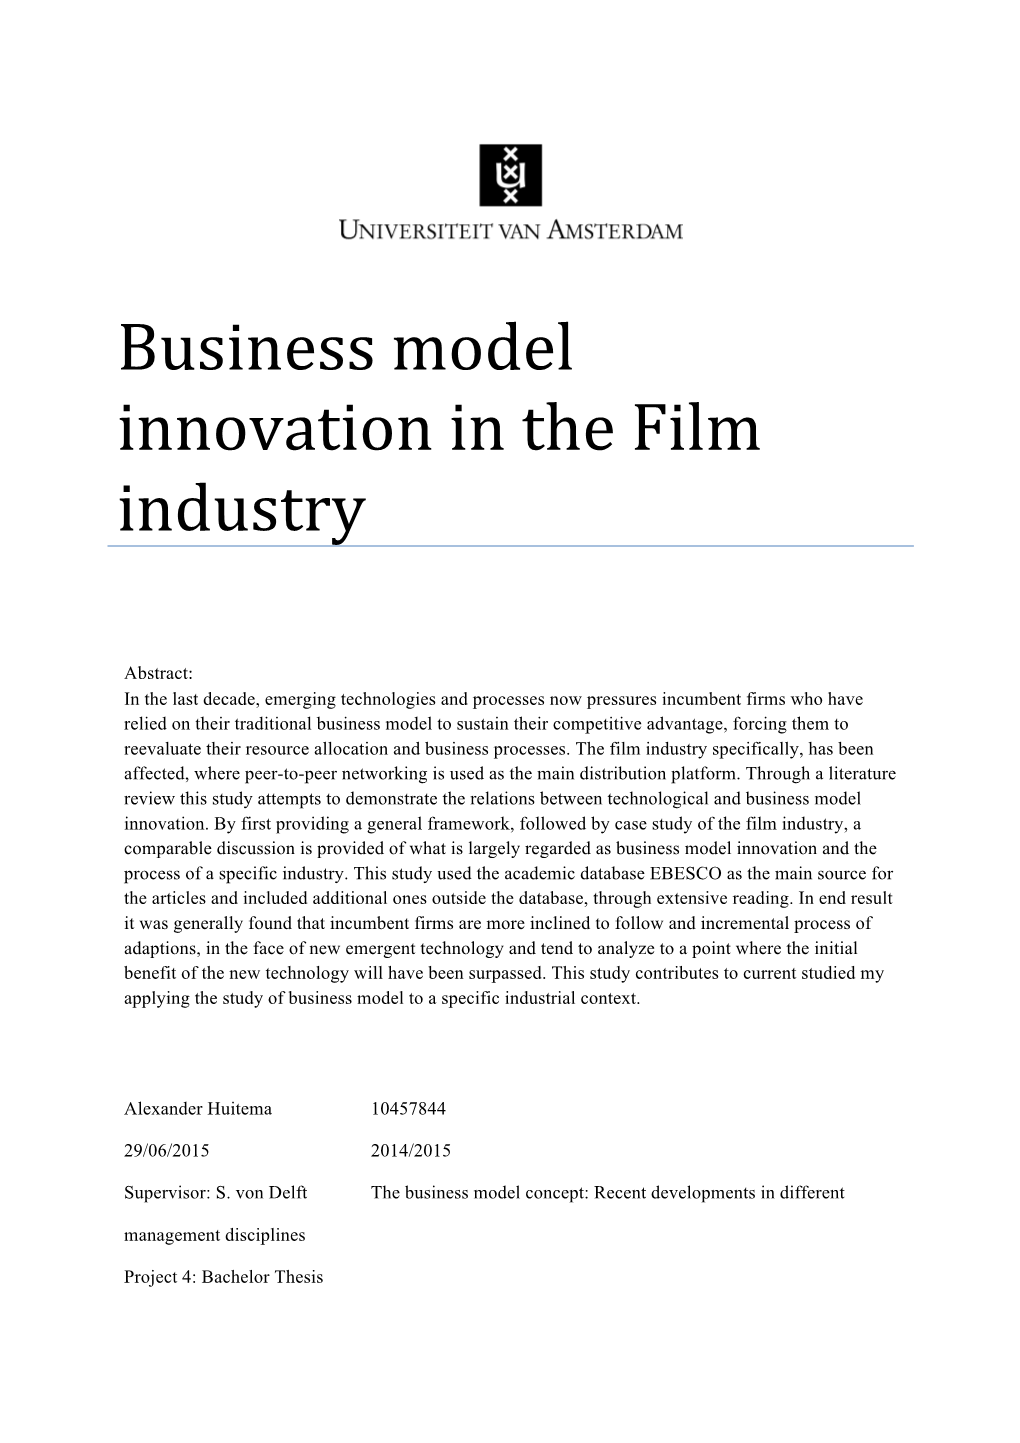 Business Model Innovation in the Film Industry